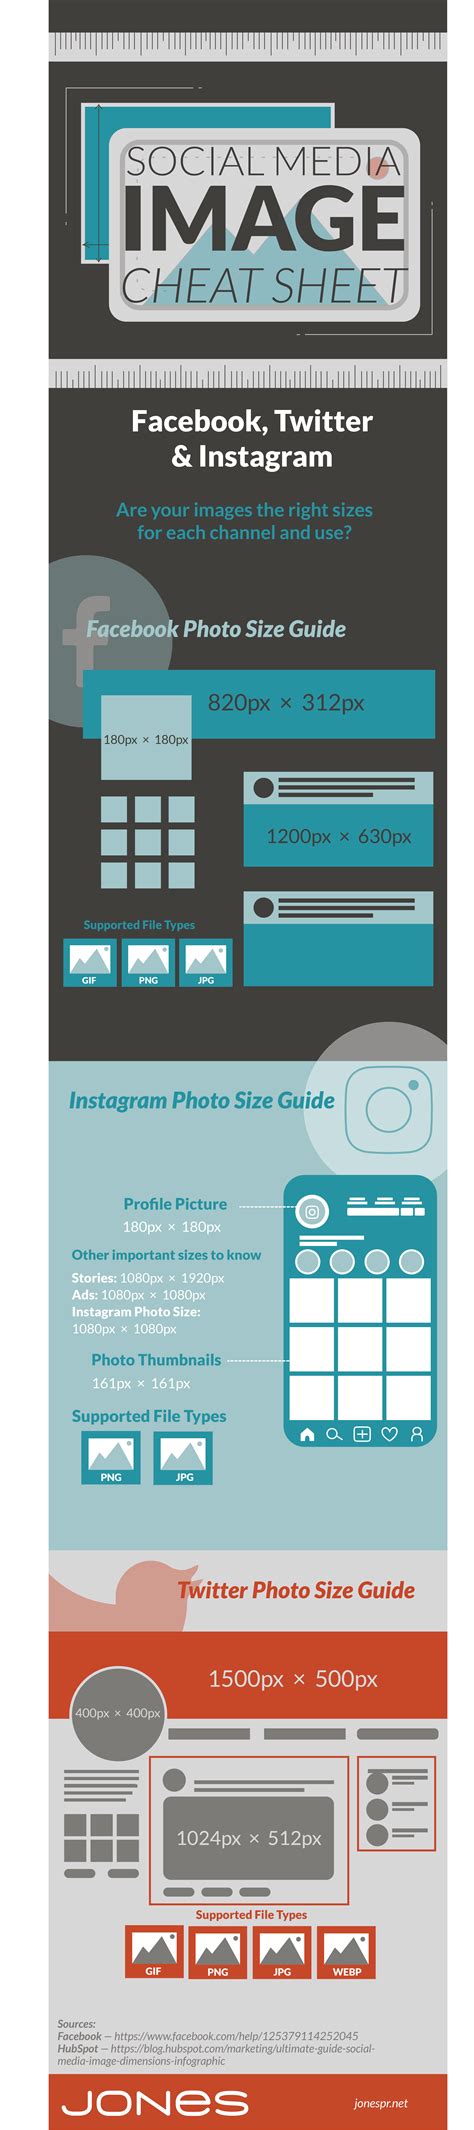 Social Media Image Size Cheat Sheet Infographic Optimum Dimensions For Key Image Opportunities